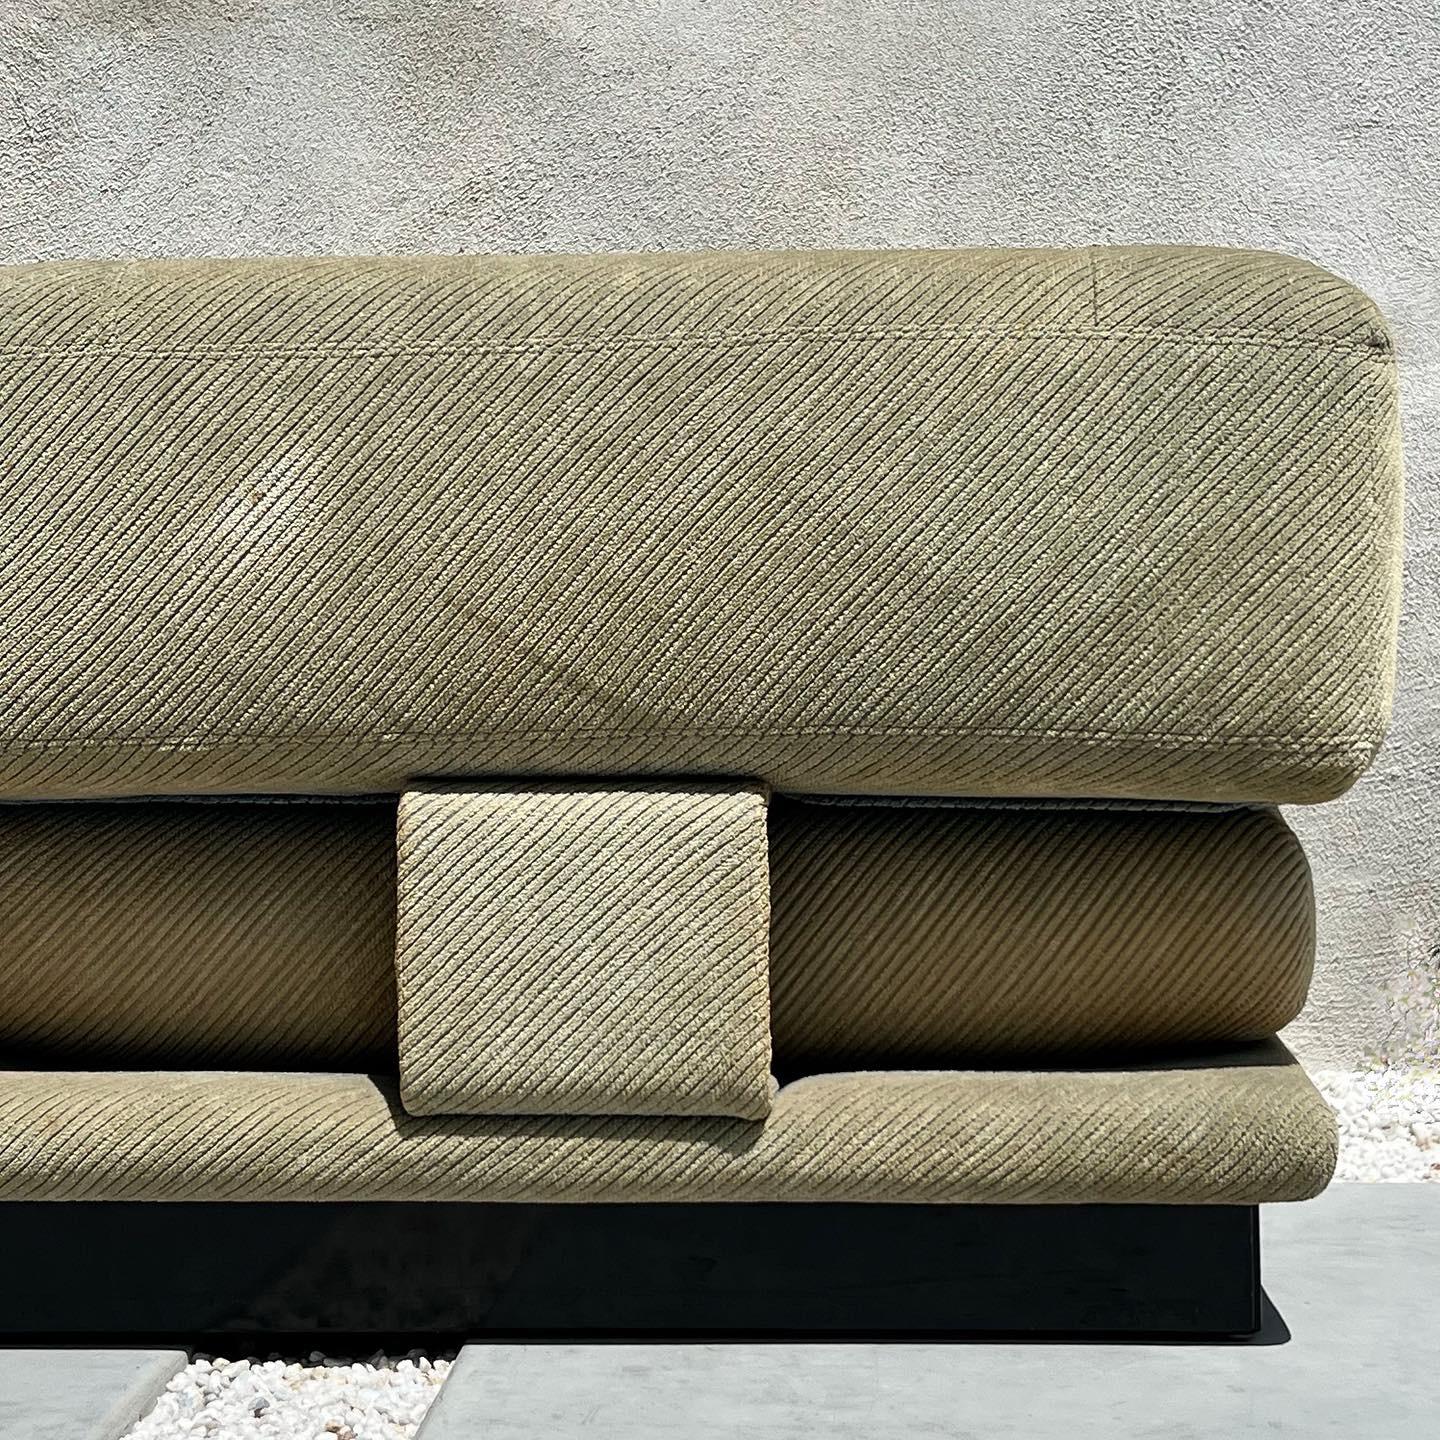 A high-end vintage Italian modernist sofa by Saporiti Italia, circa 1970s. Textured sage green velour upholstery is original and in wonderful condition with minor signs of age. The sofa itself is suspended on a lacquered wooden plinth, giving it the